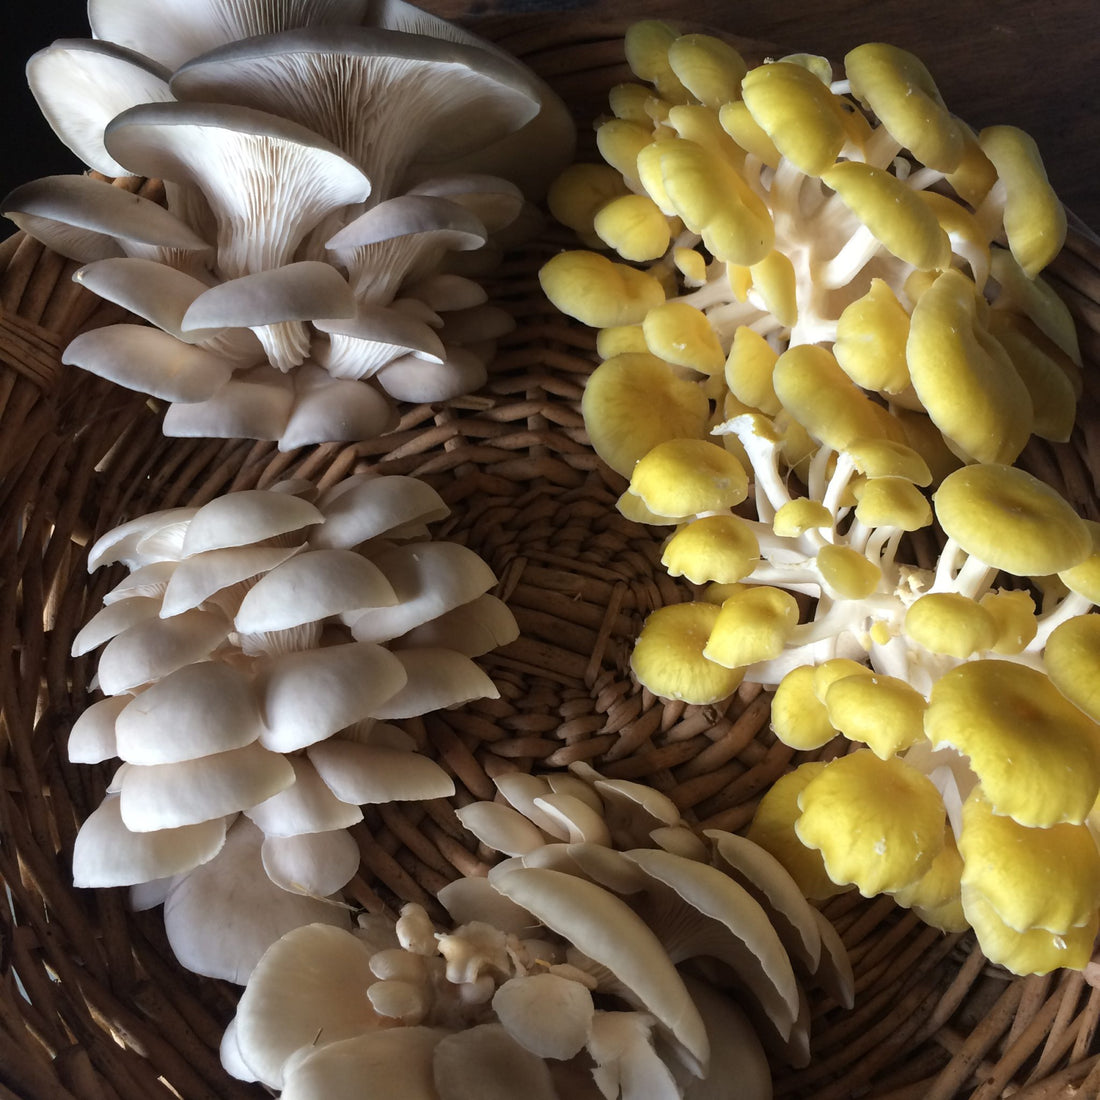 Discover Our Grow Your Own Mushroom Kit Options for Tasty Results 